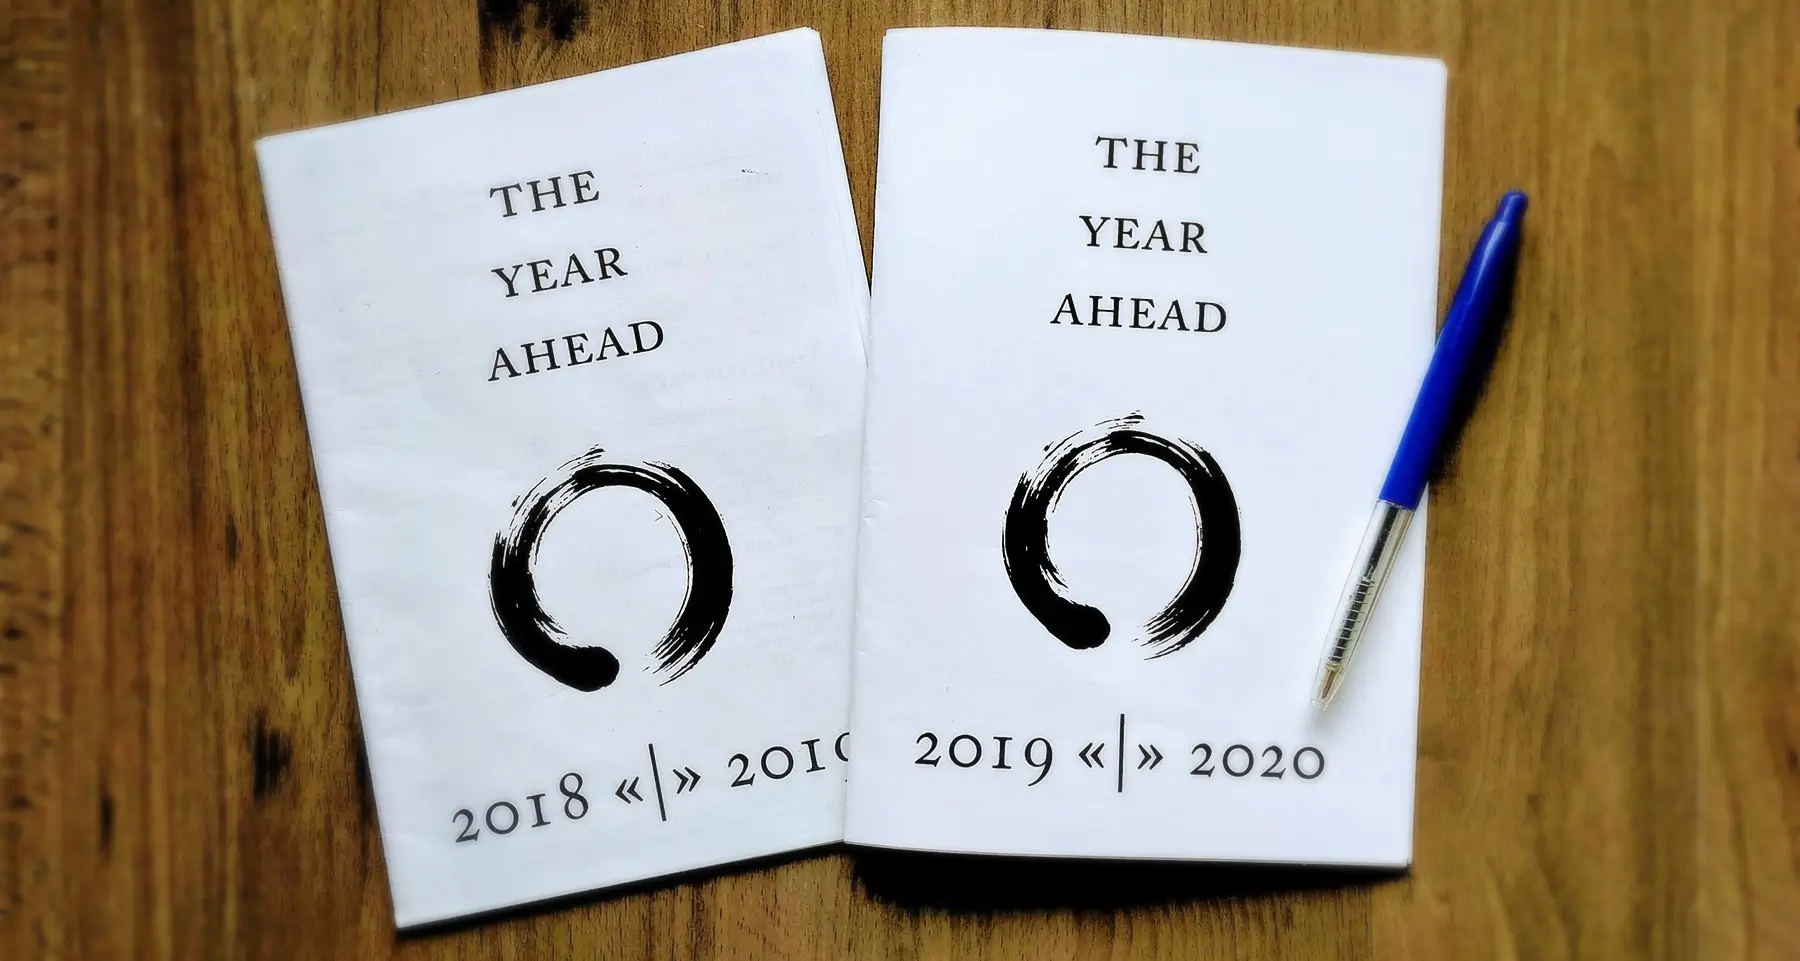 Two copies of 'The Year Ahead 2019 - 2020' lie on a table, with a blue pen.